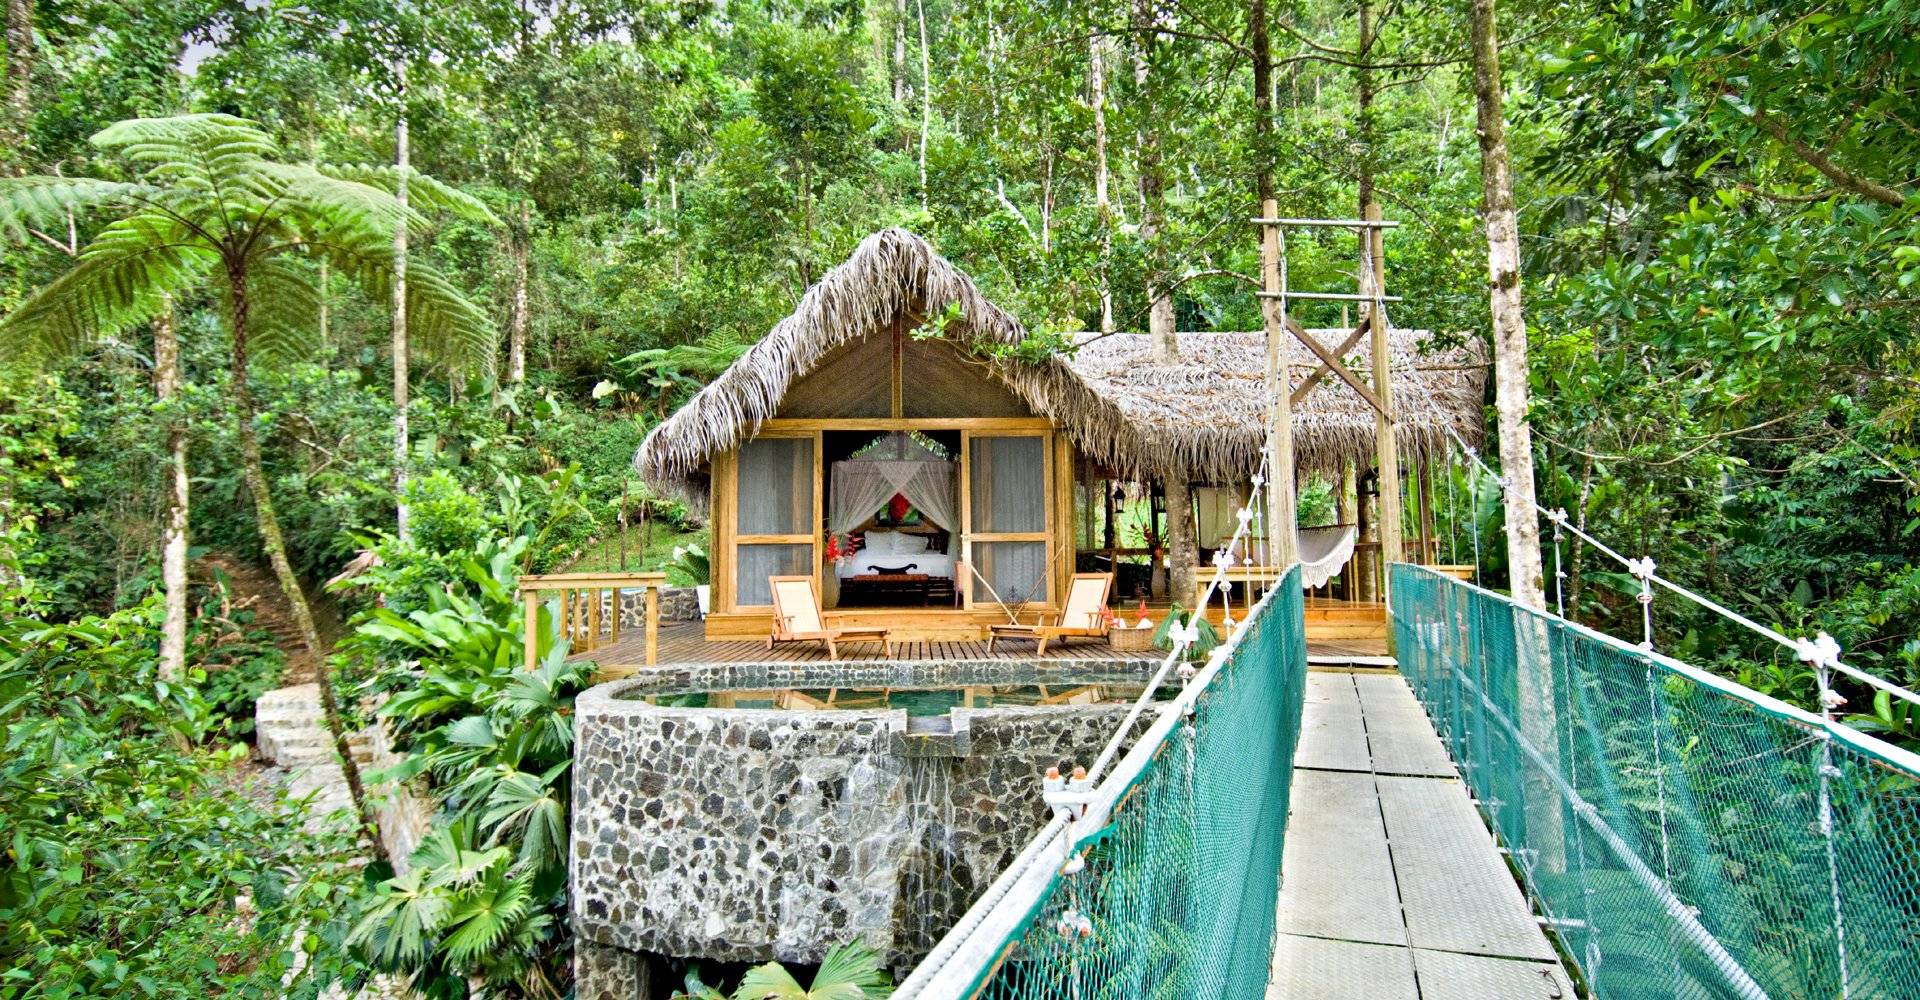 Costa Rica, Pacuare Lodge, Canopy Suite, Latin America Tours